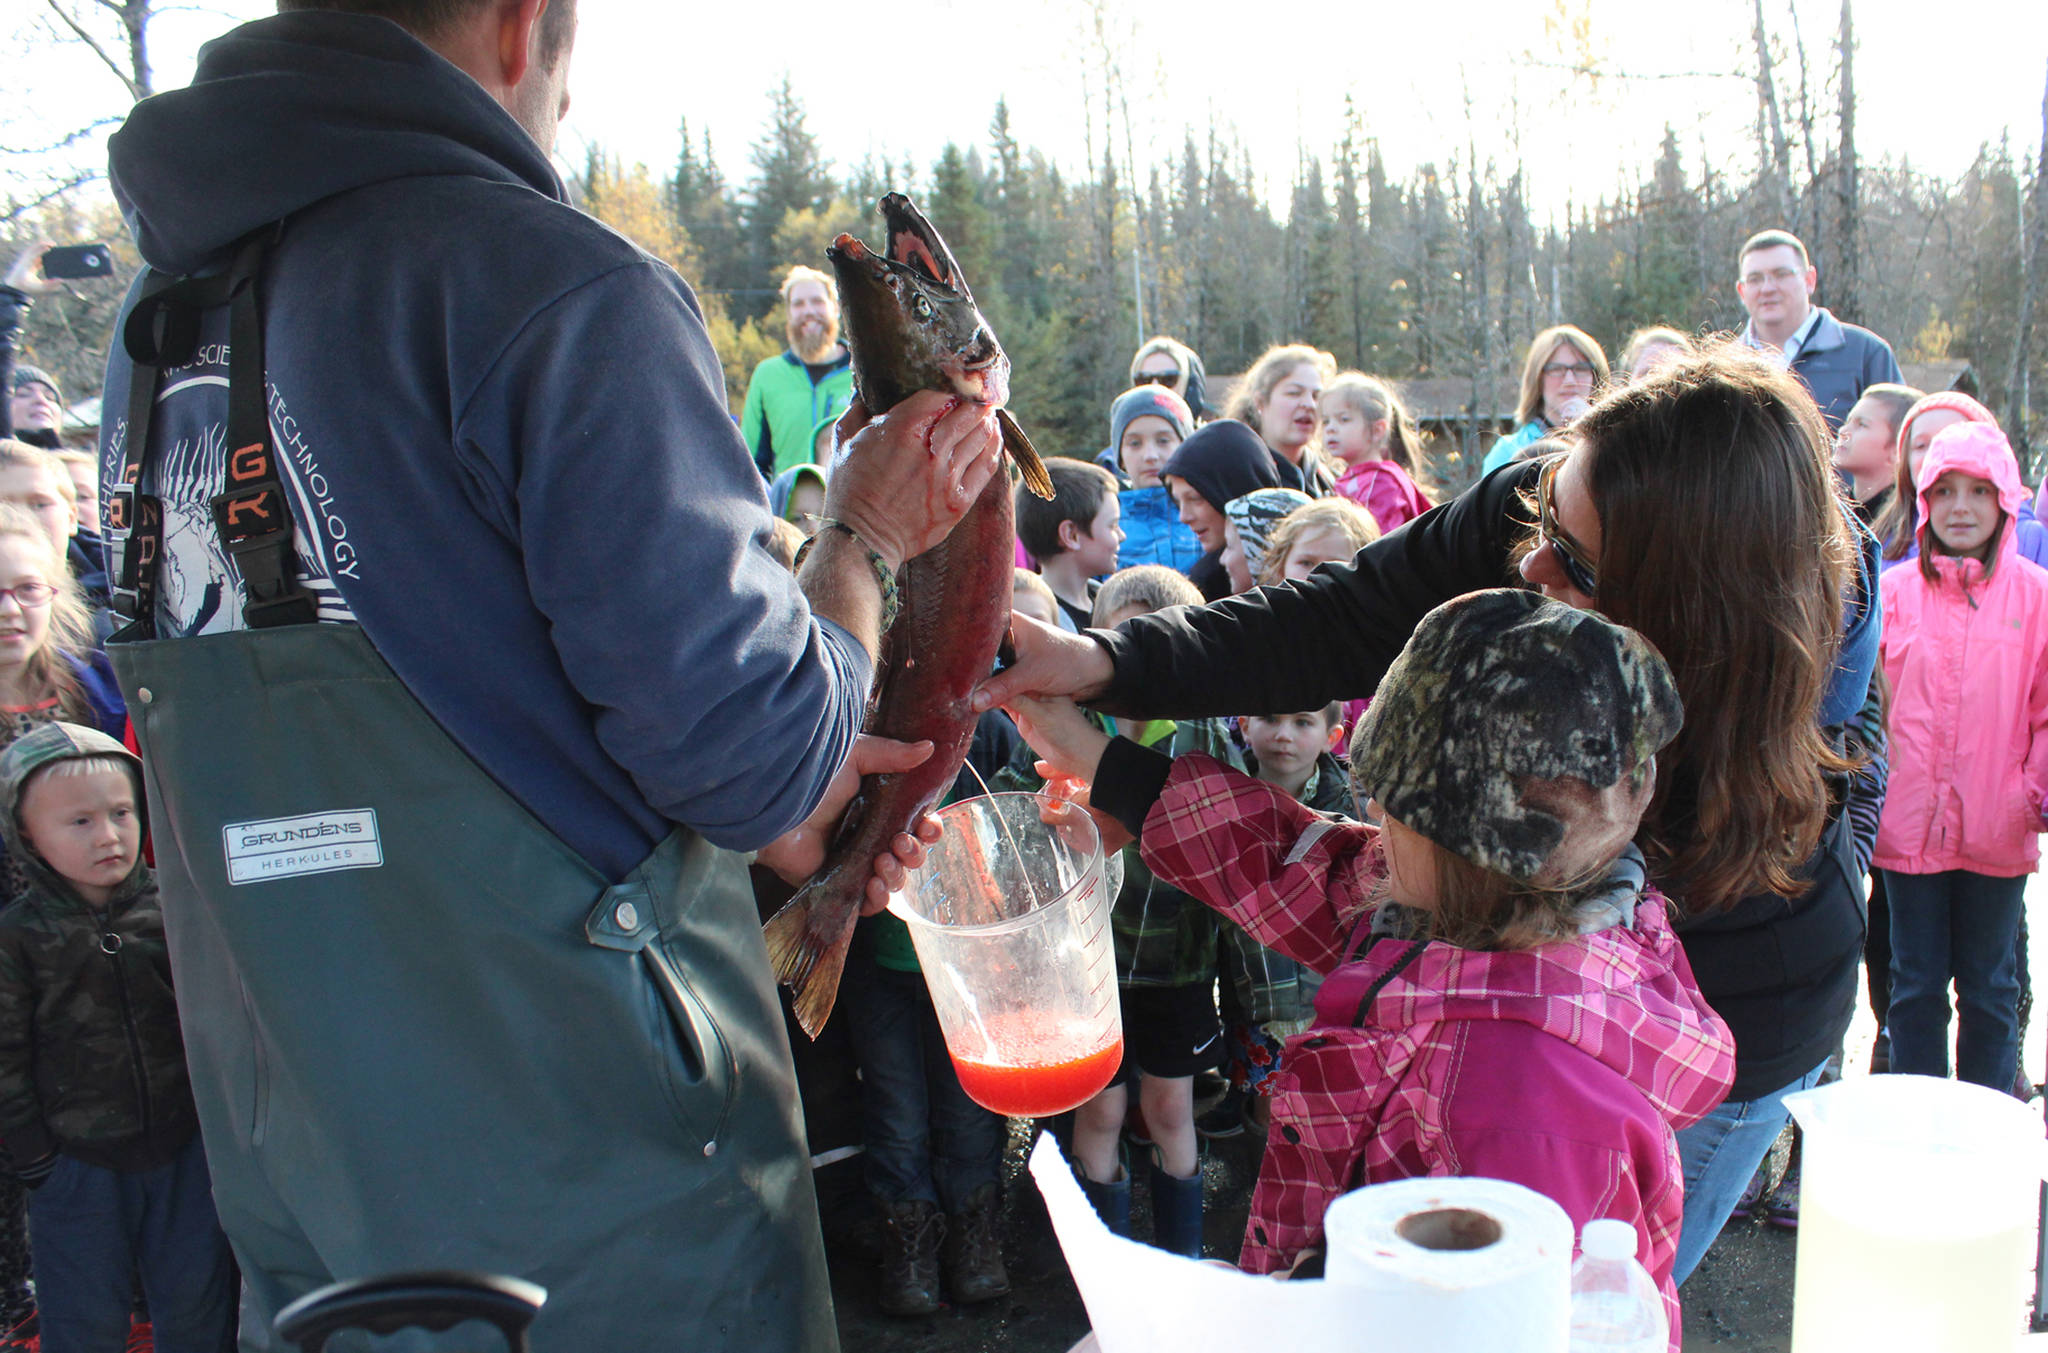 Jenny Gates and Tim Blackman, with the Alaska Department of Fish and Game, show students from lower Kenai Peninsula schools how to mix salmon eggs with salmon milt, or sperm, during an egg take demonstration Thursday, Oct. 5, 2017 at the Anchor River in Anchor Point, Alaska. (Photo by Megan Pacer/Homer News)